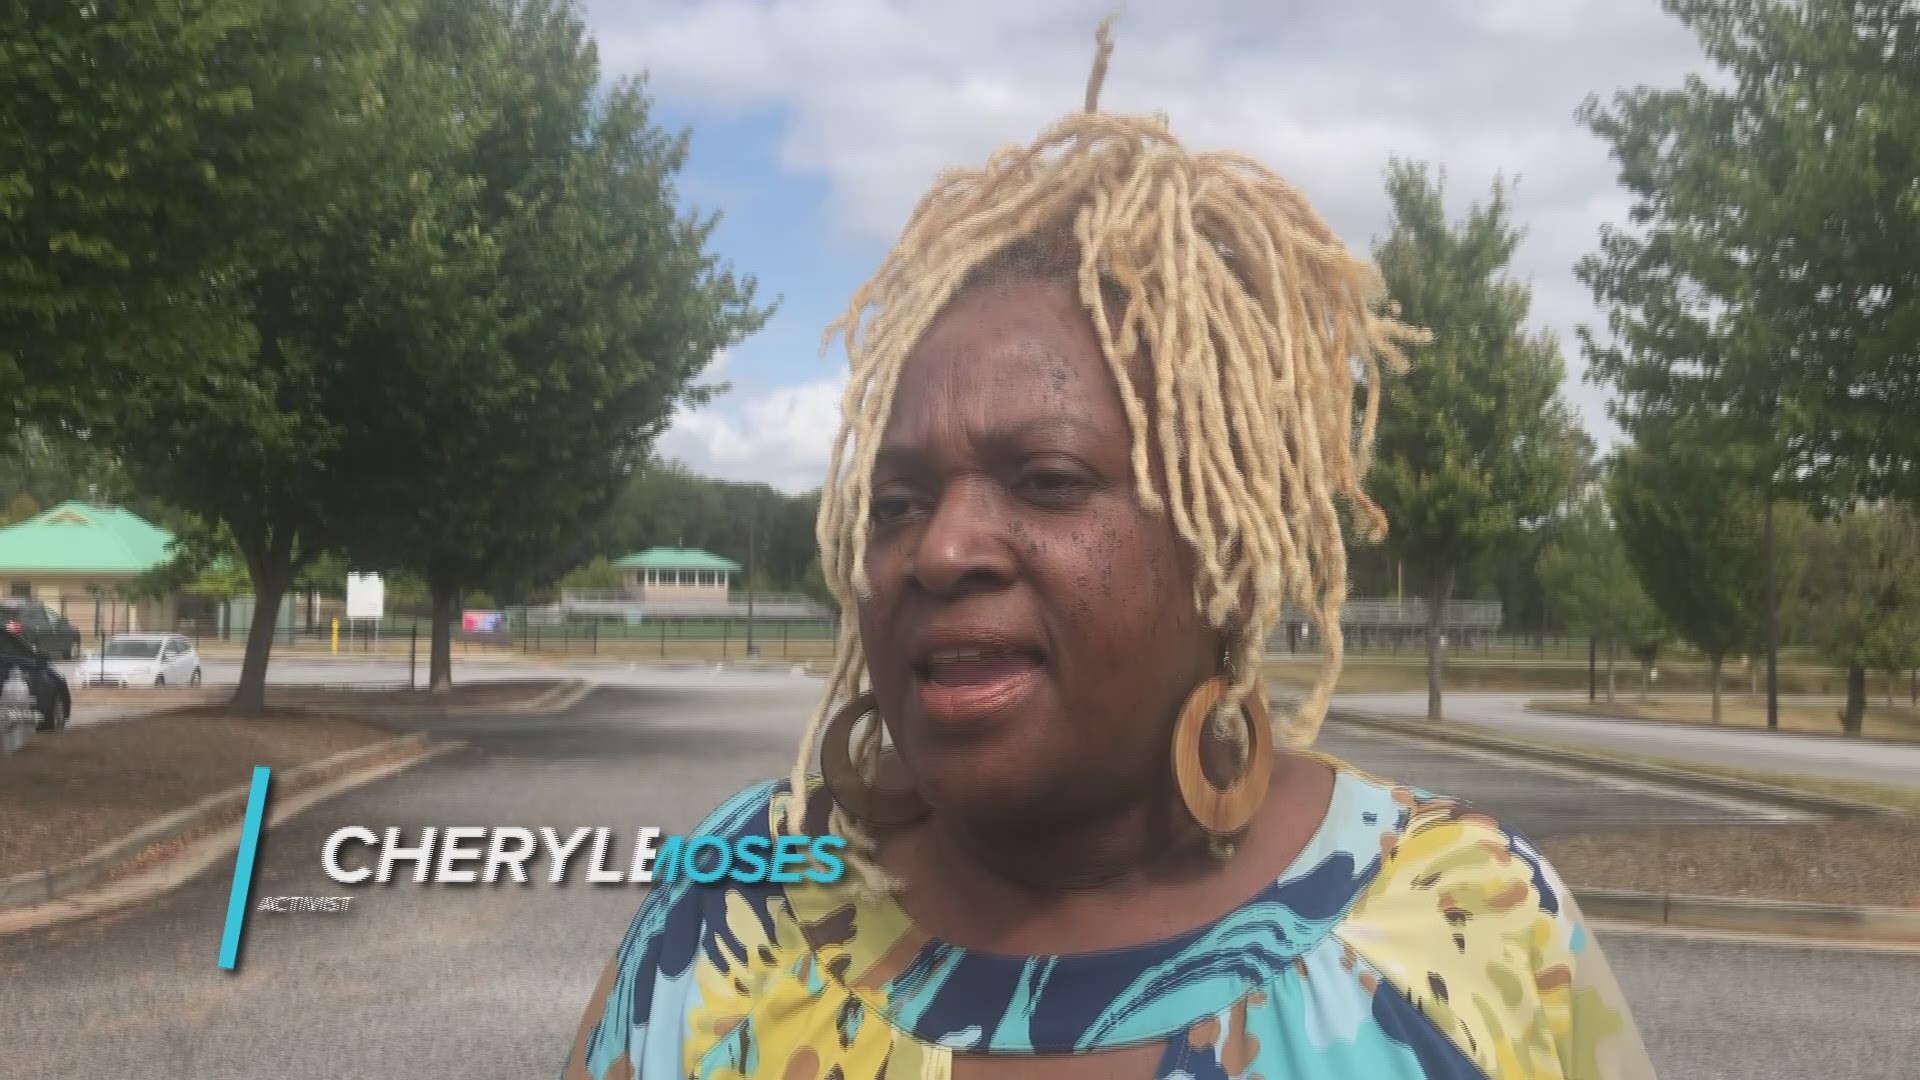 Cheryle Moses tells 11Alive why she and other Lilburn residents are protesting the Gandhi statue and food forest.